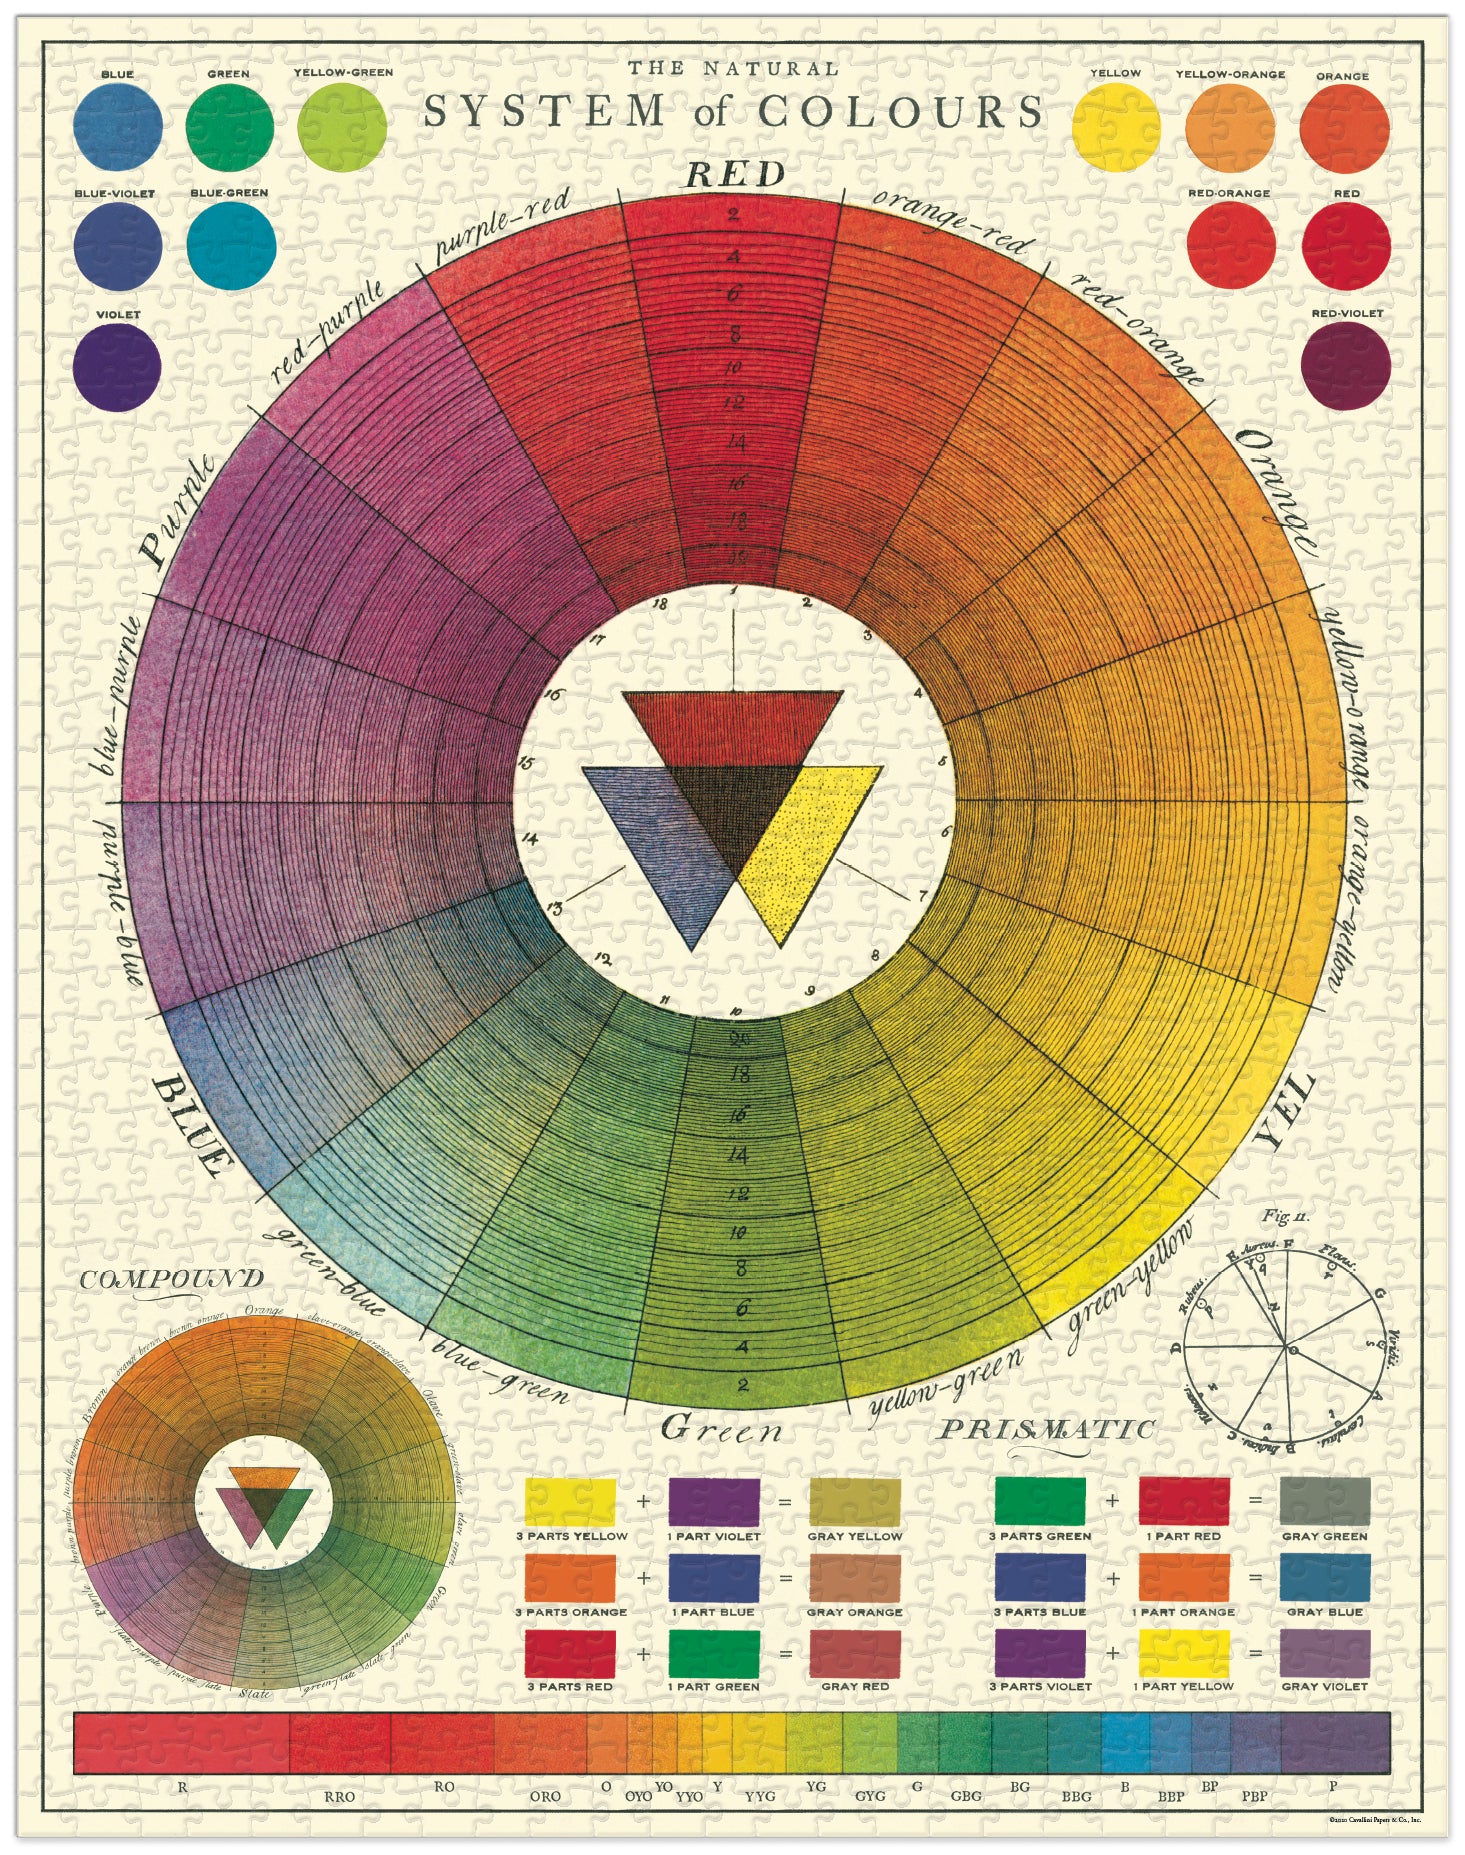 Crystal Productions Student Color Wheel Poster 